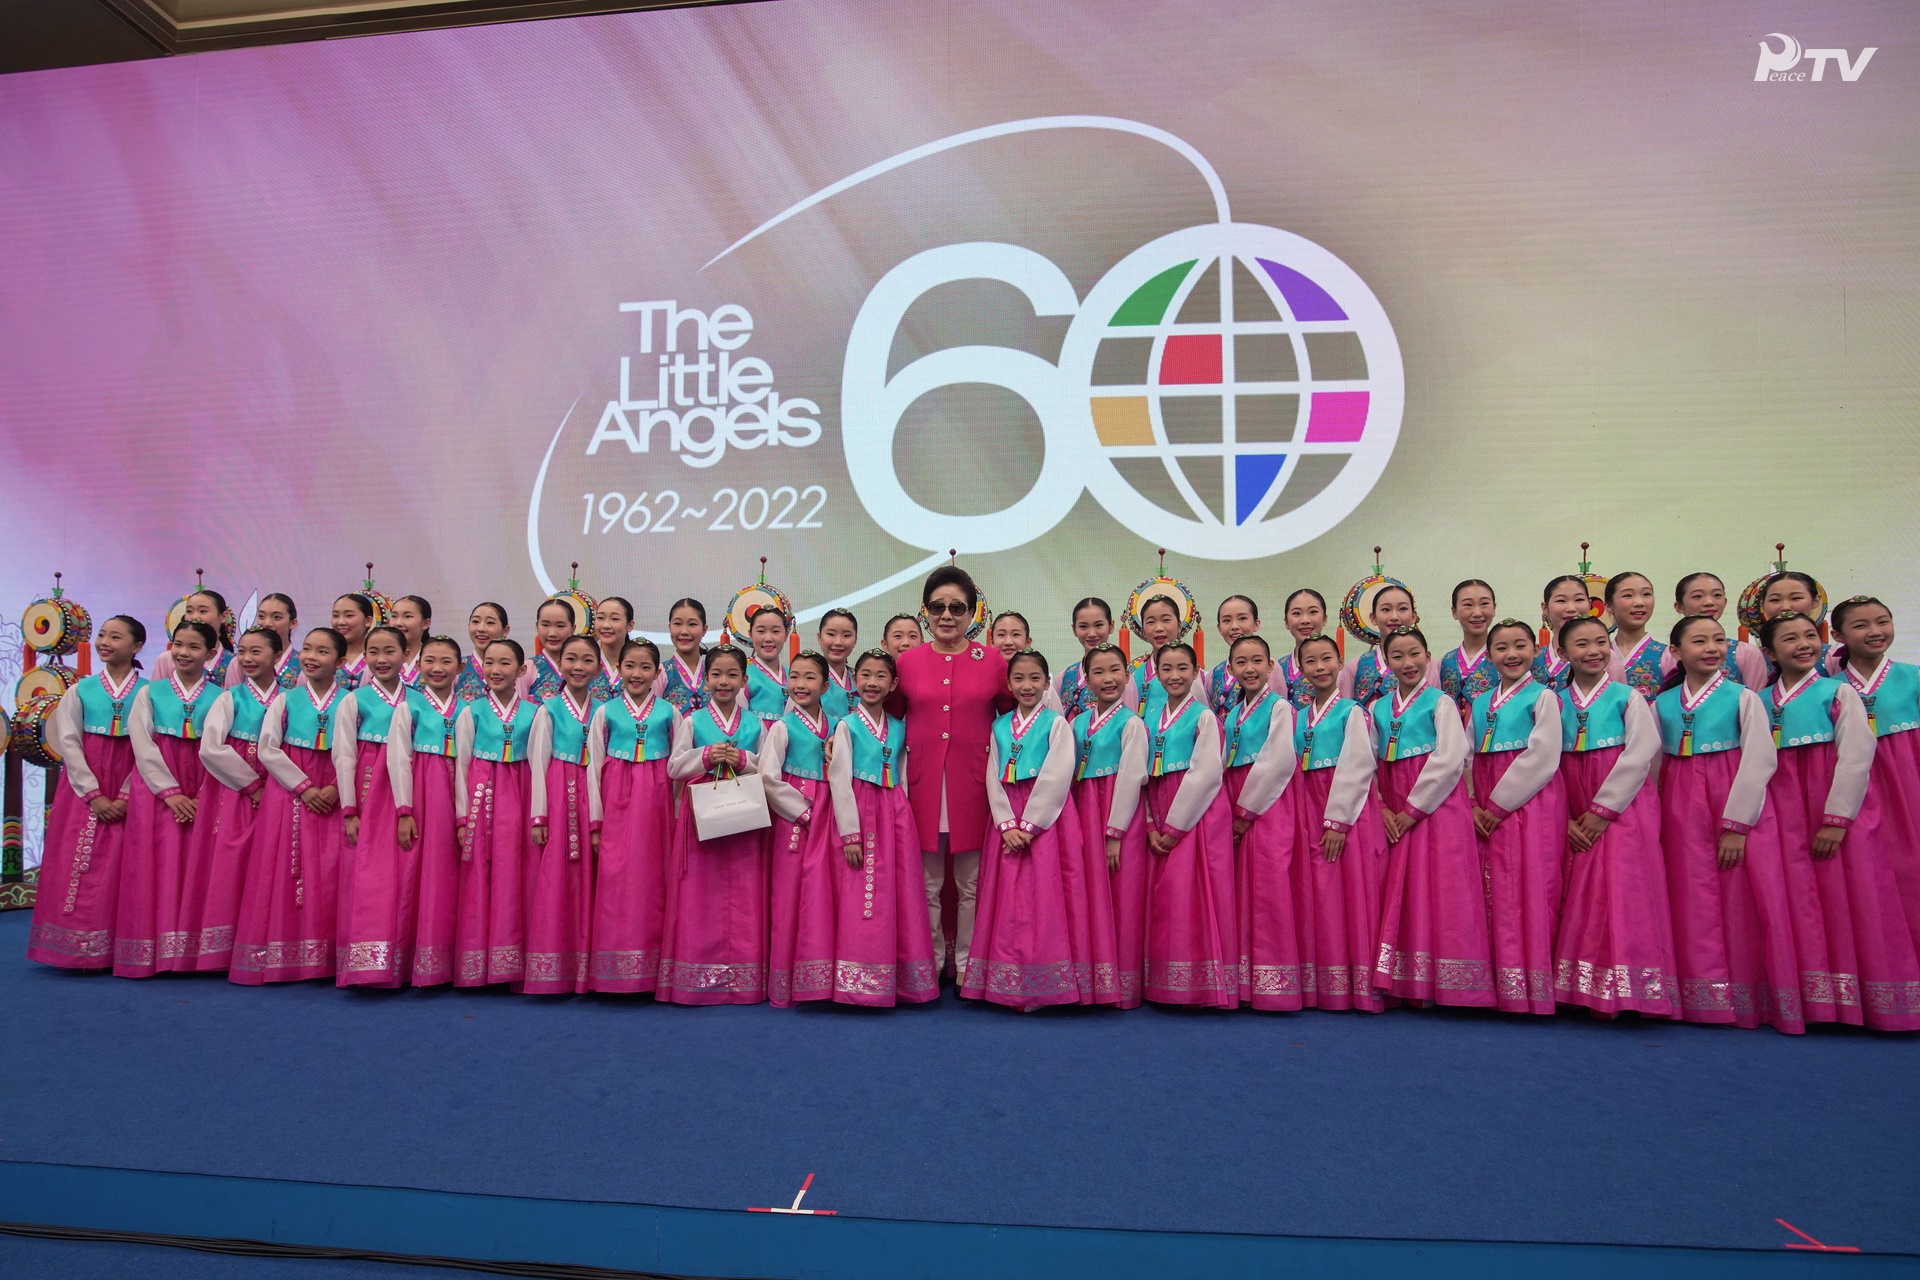 Performance Marking the 60th Anniversary of the Little Angels (August 12, Jamshil Lotte Hotel)